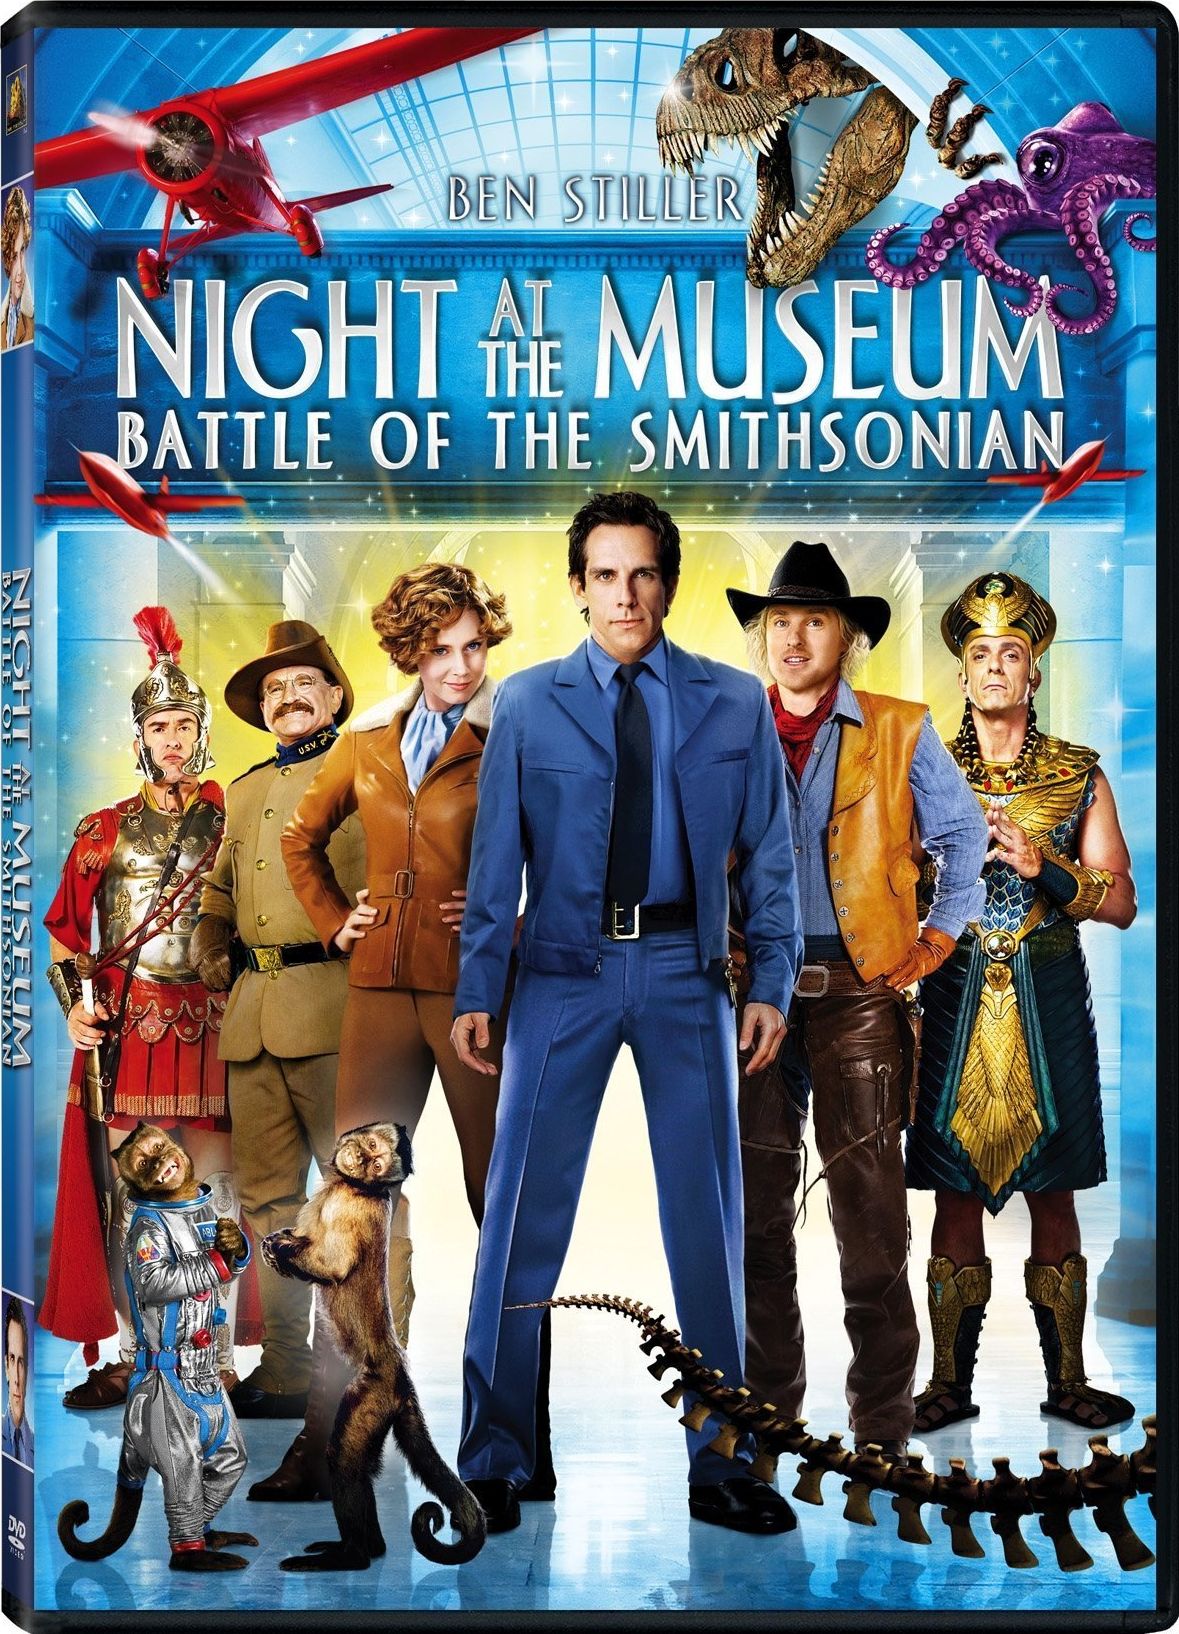 Night at the Museum: Battle of the Smithsonian DVD Release 